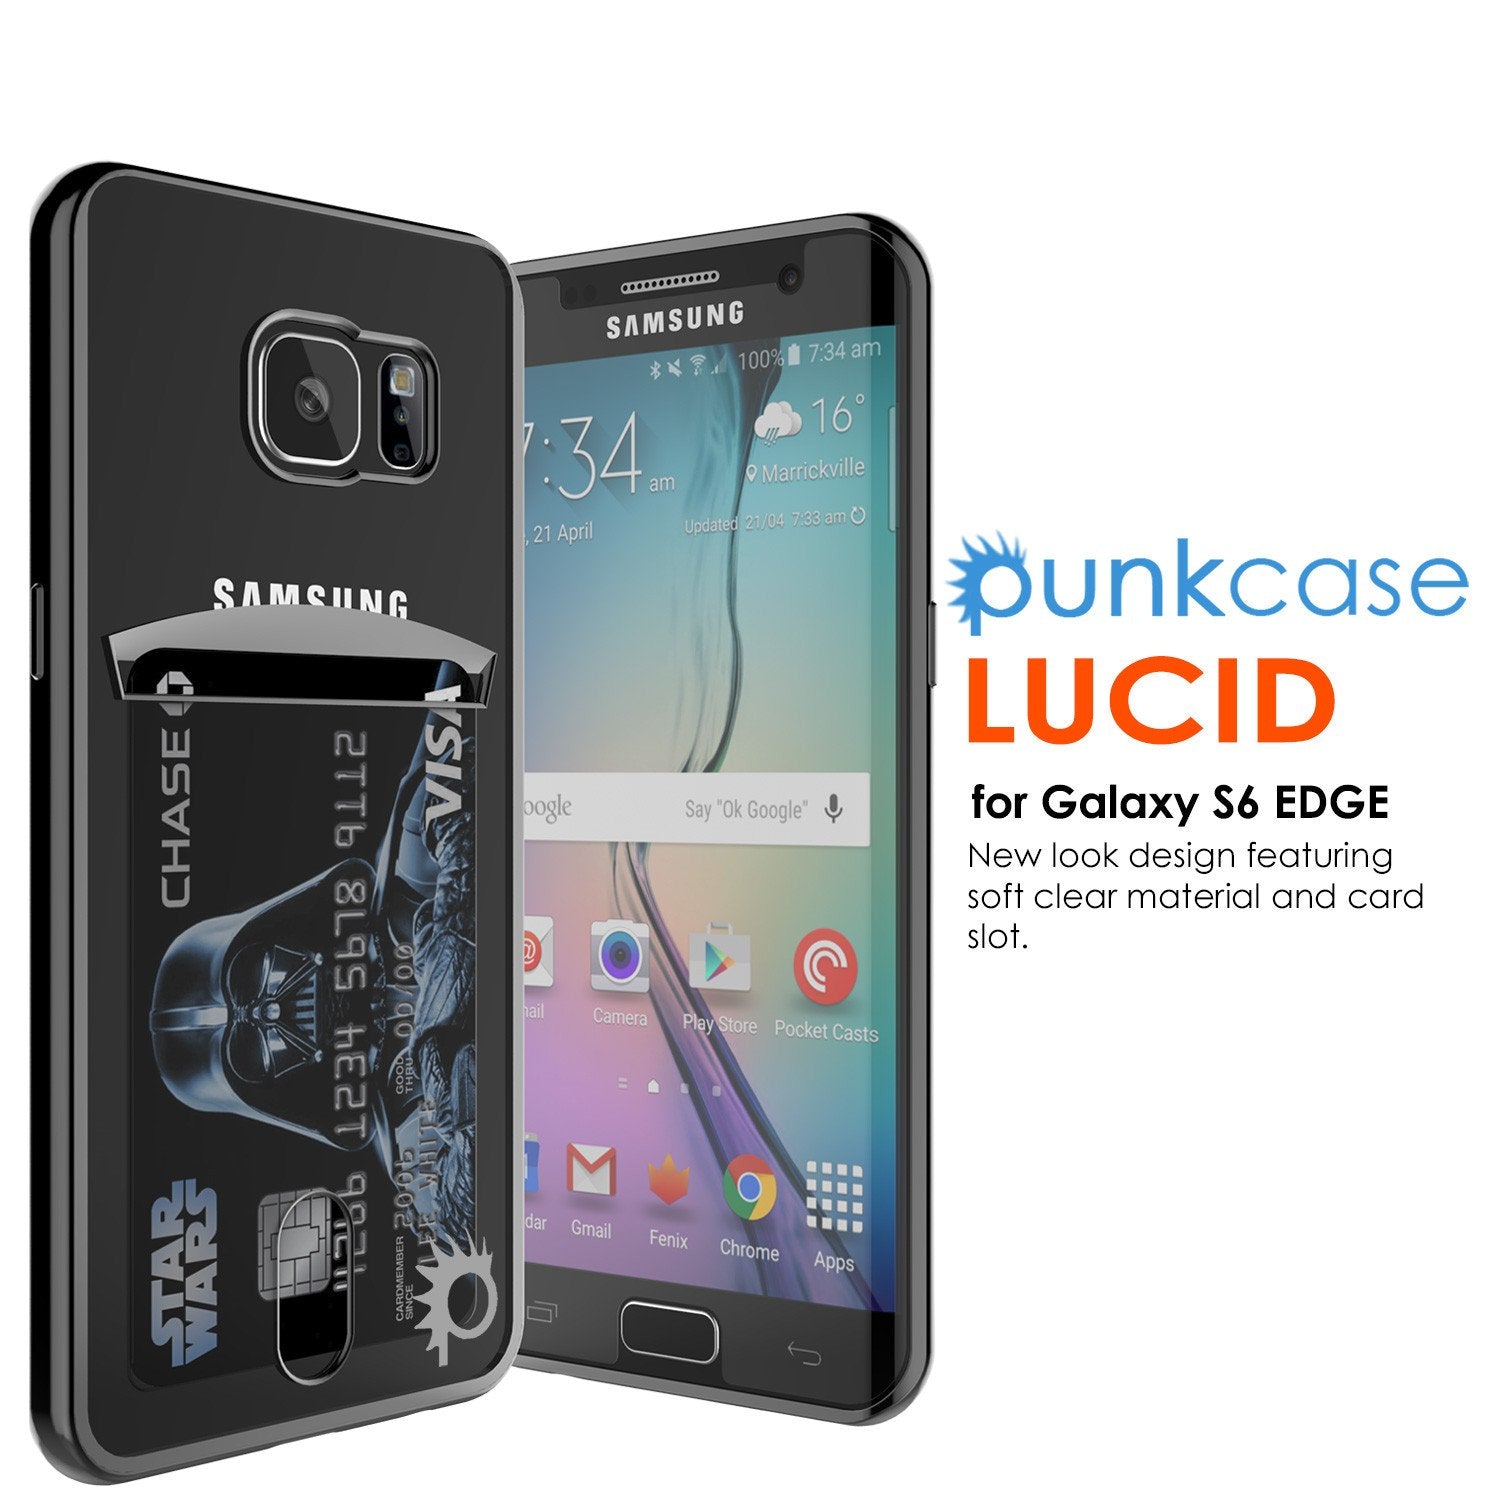 Galaxy S6 EDGE Case, PUNKCASE® LUCID Black Series | Card Slot | SHIELD Screen Protector | Ultra fit